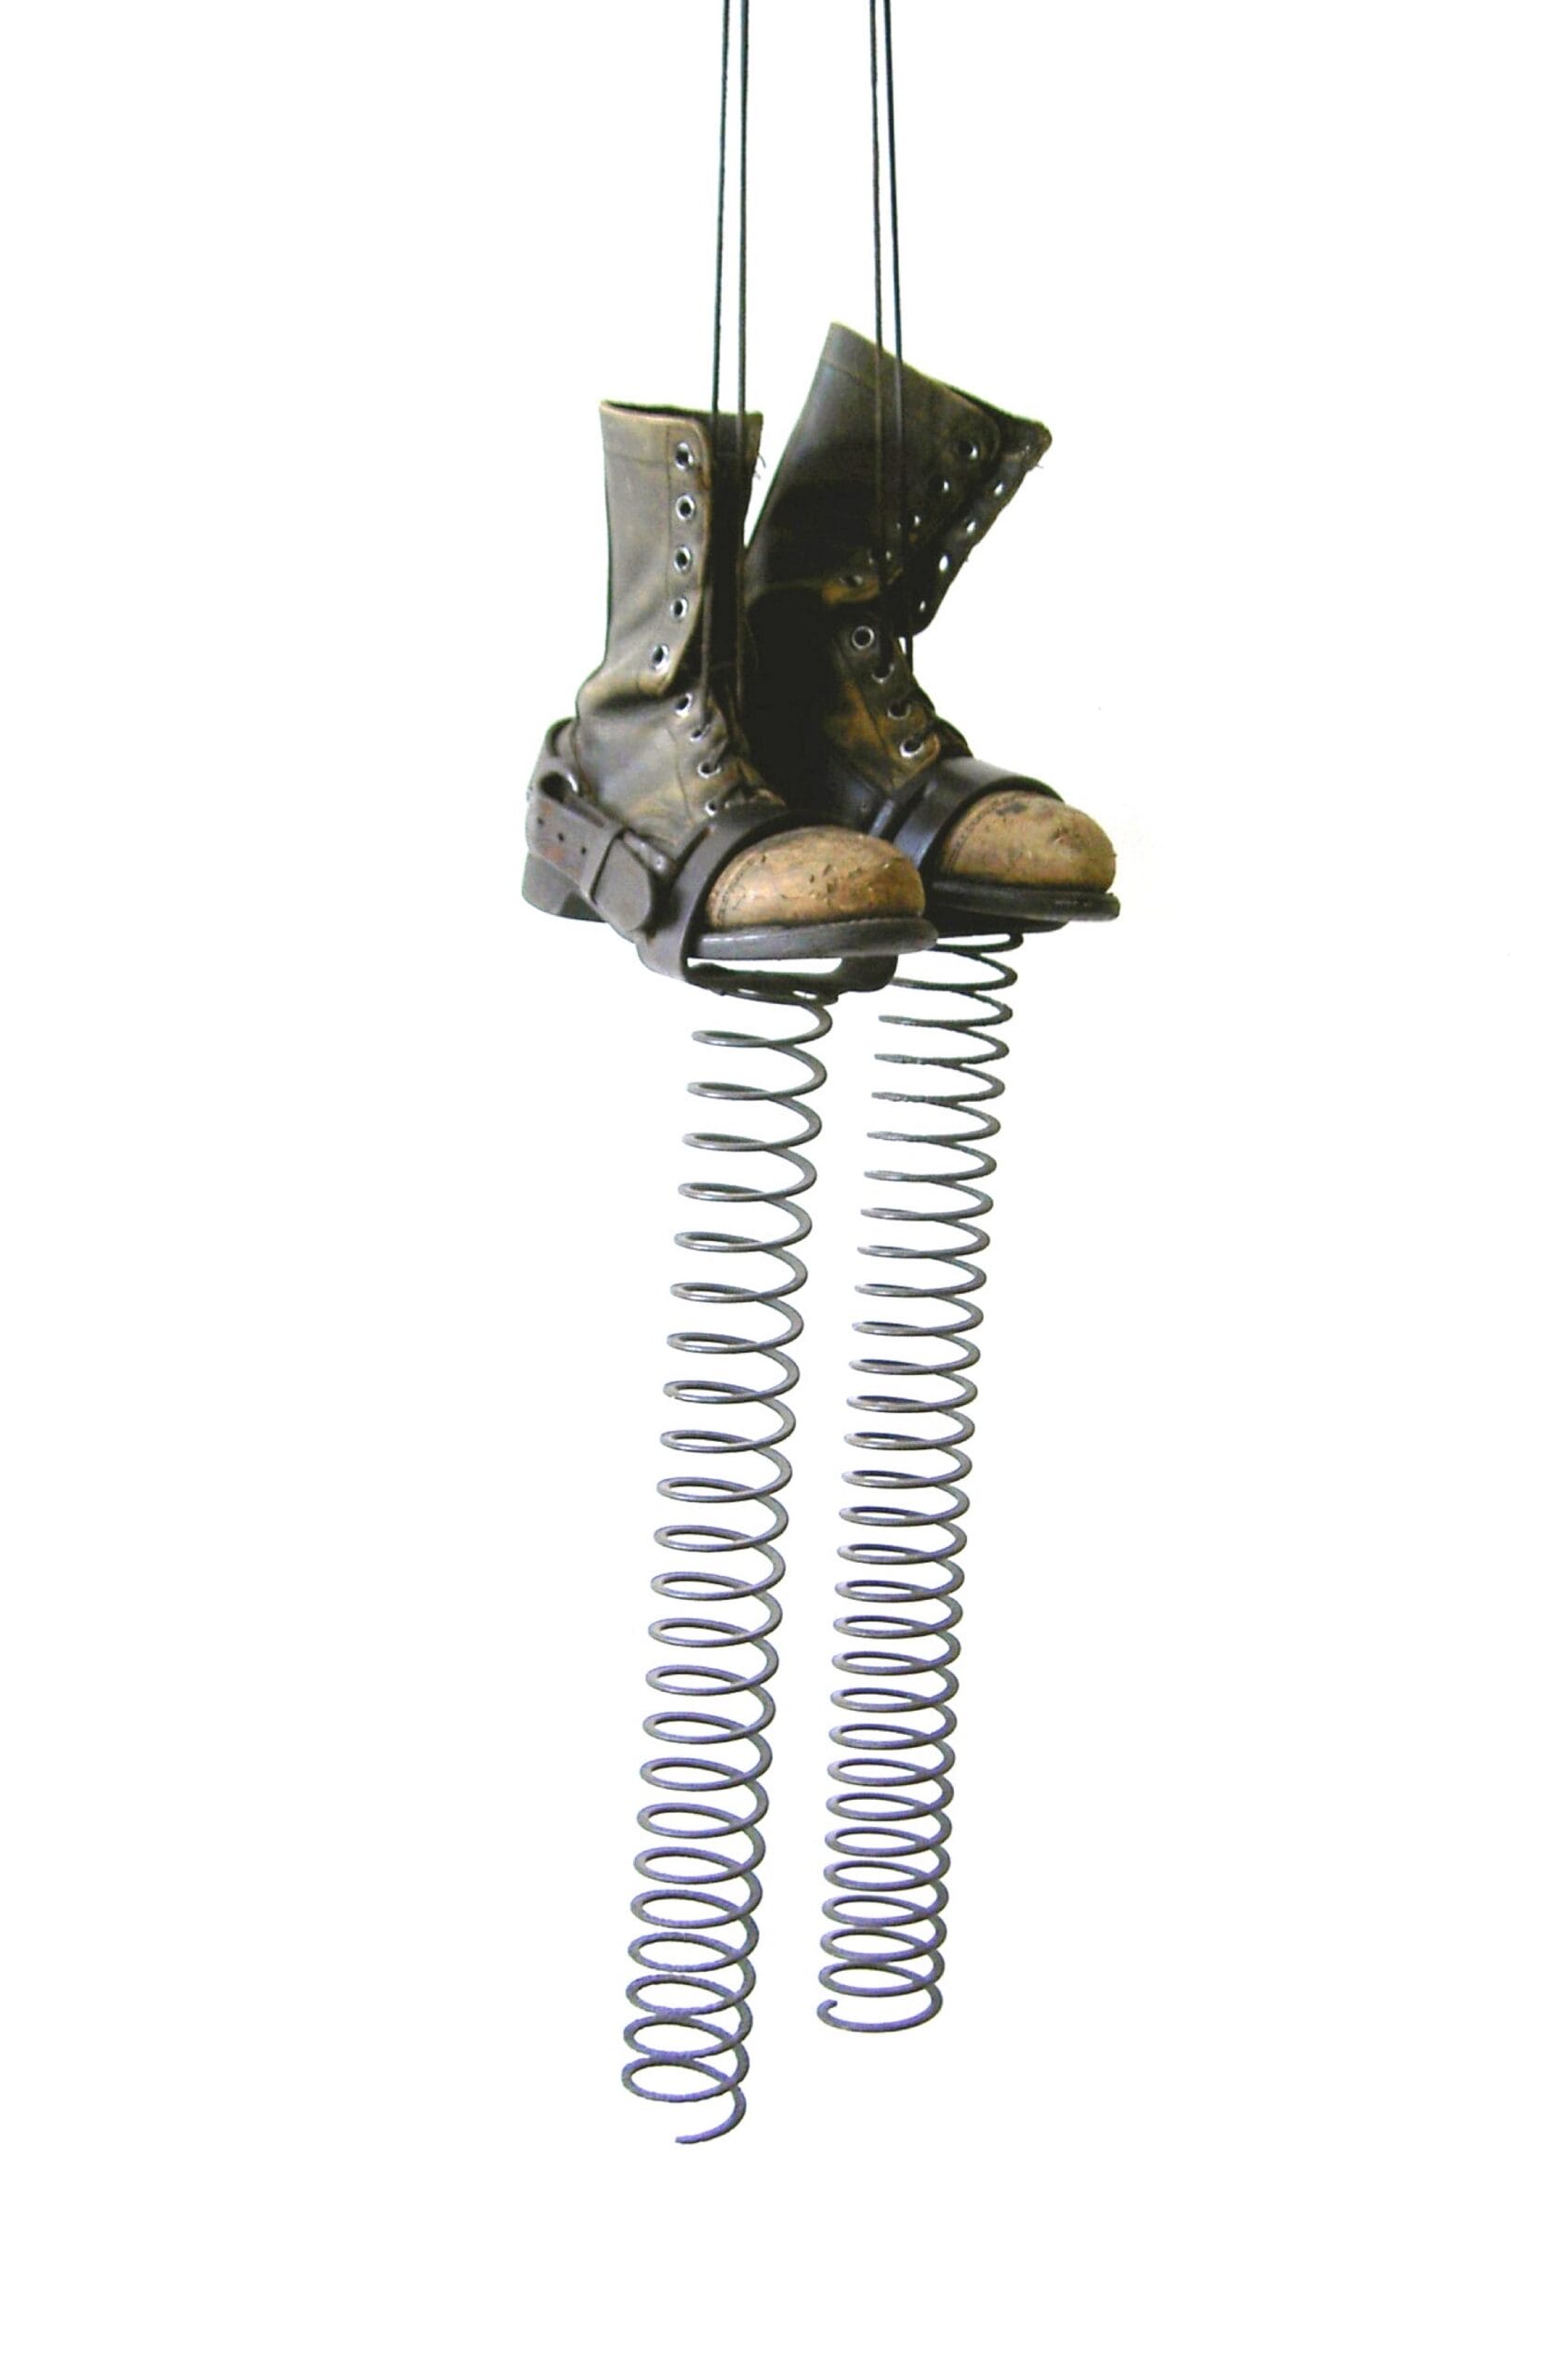 a sculpture of an old pair of military-issue boots with spring contraptions attached to the bottom as if they could be used to bounce very high